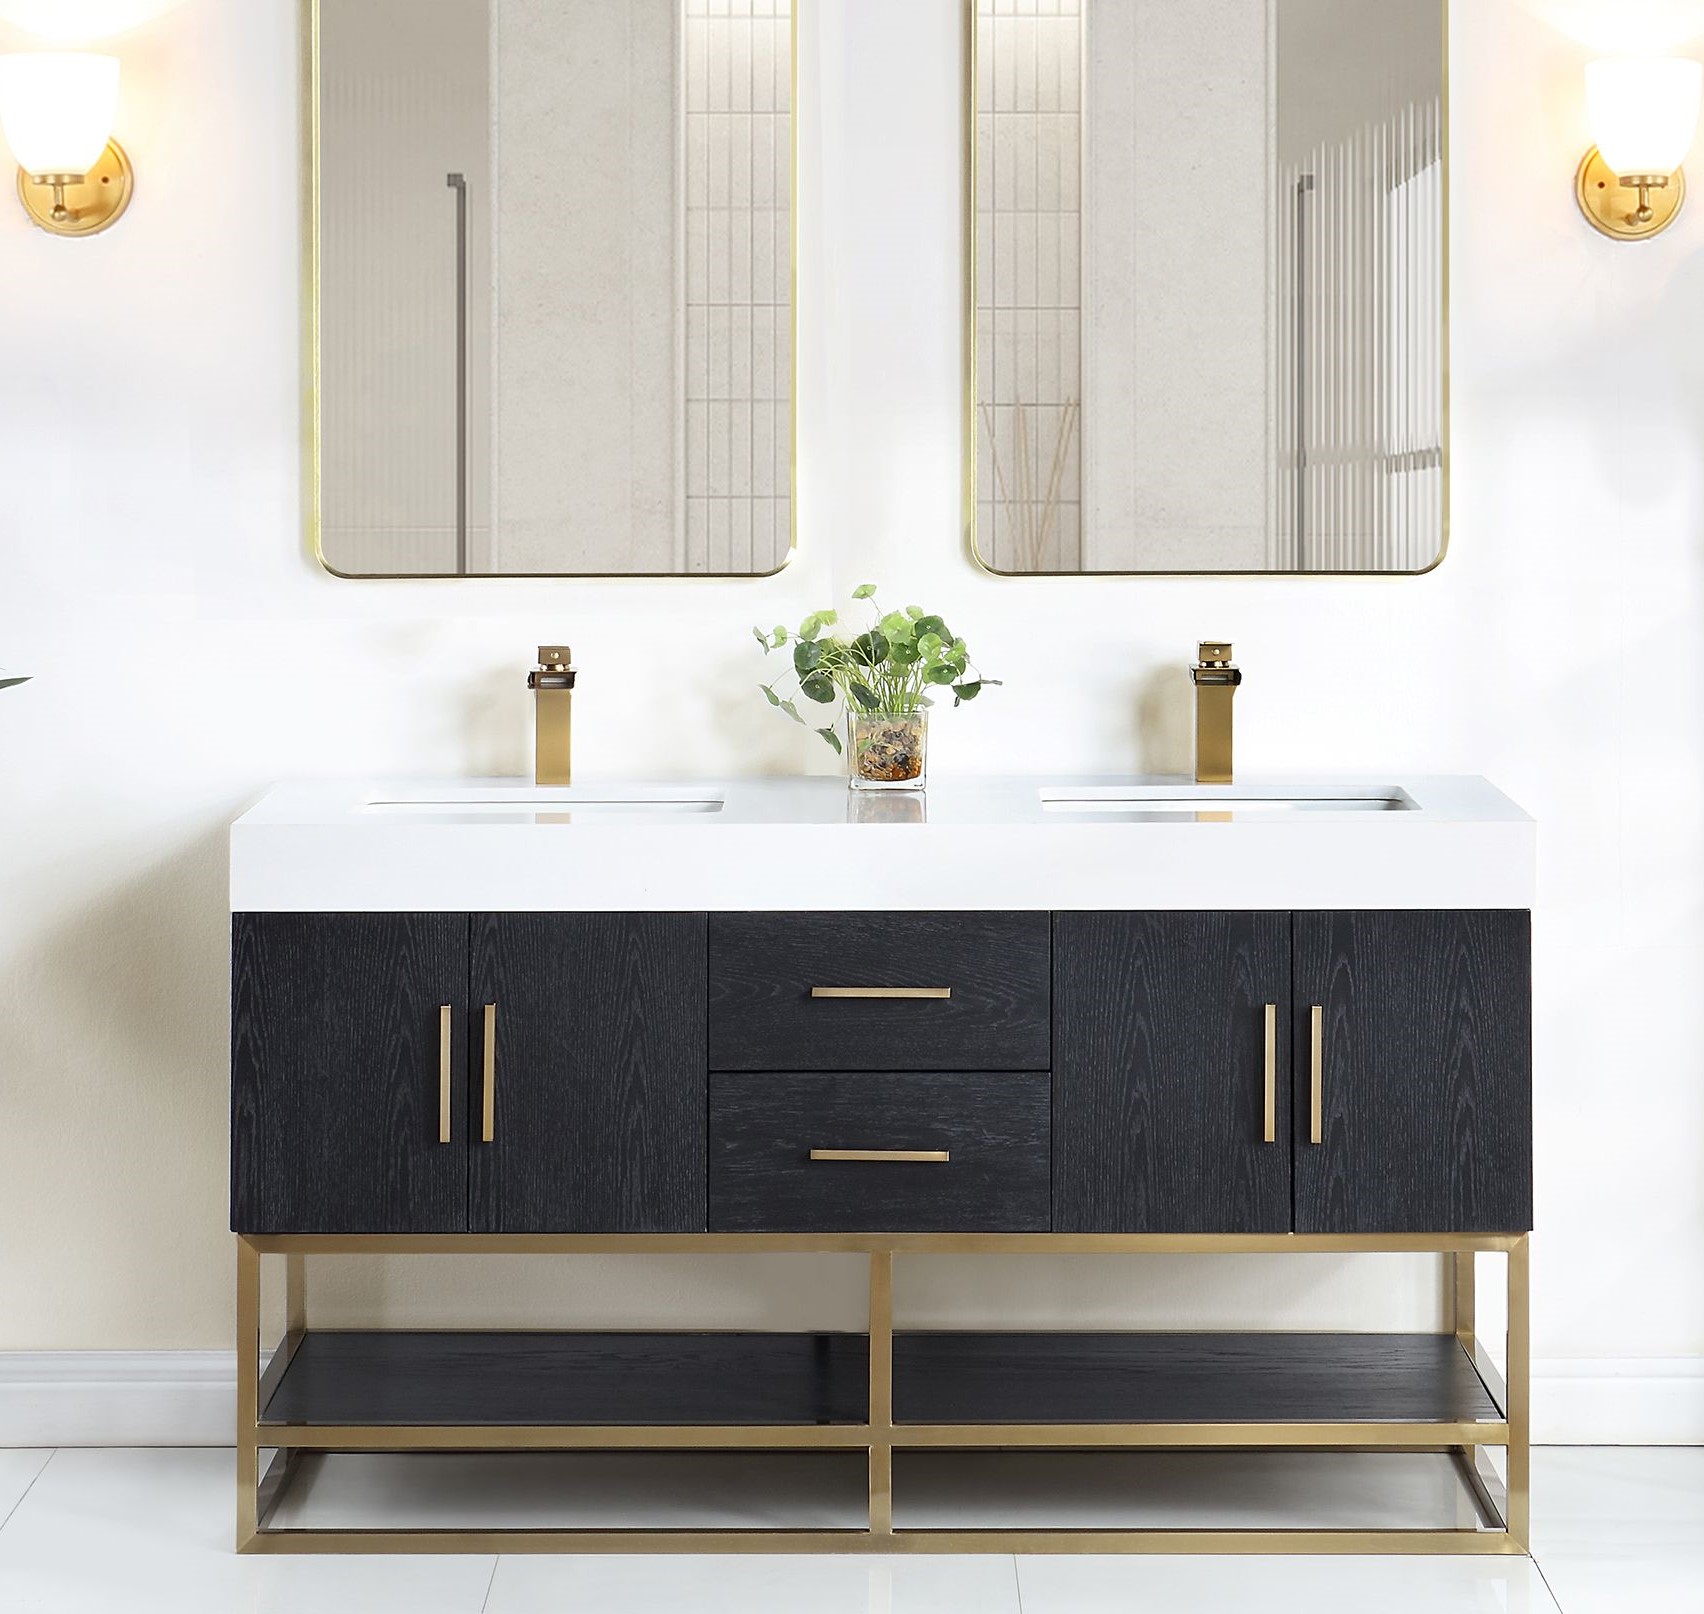 Issac Edwards 60" Double Bathroom Vanity in Black Oak with Brushed Gold Support Base and White Composite Stone Countertop with Mirror